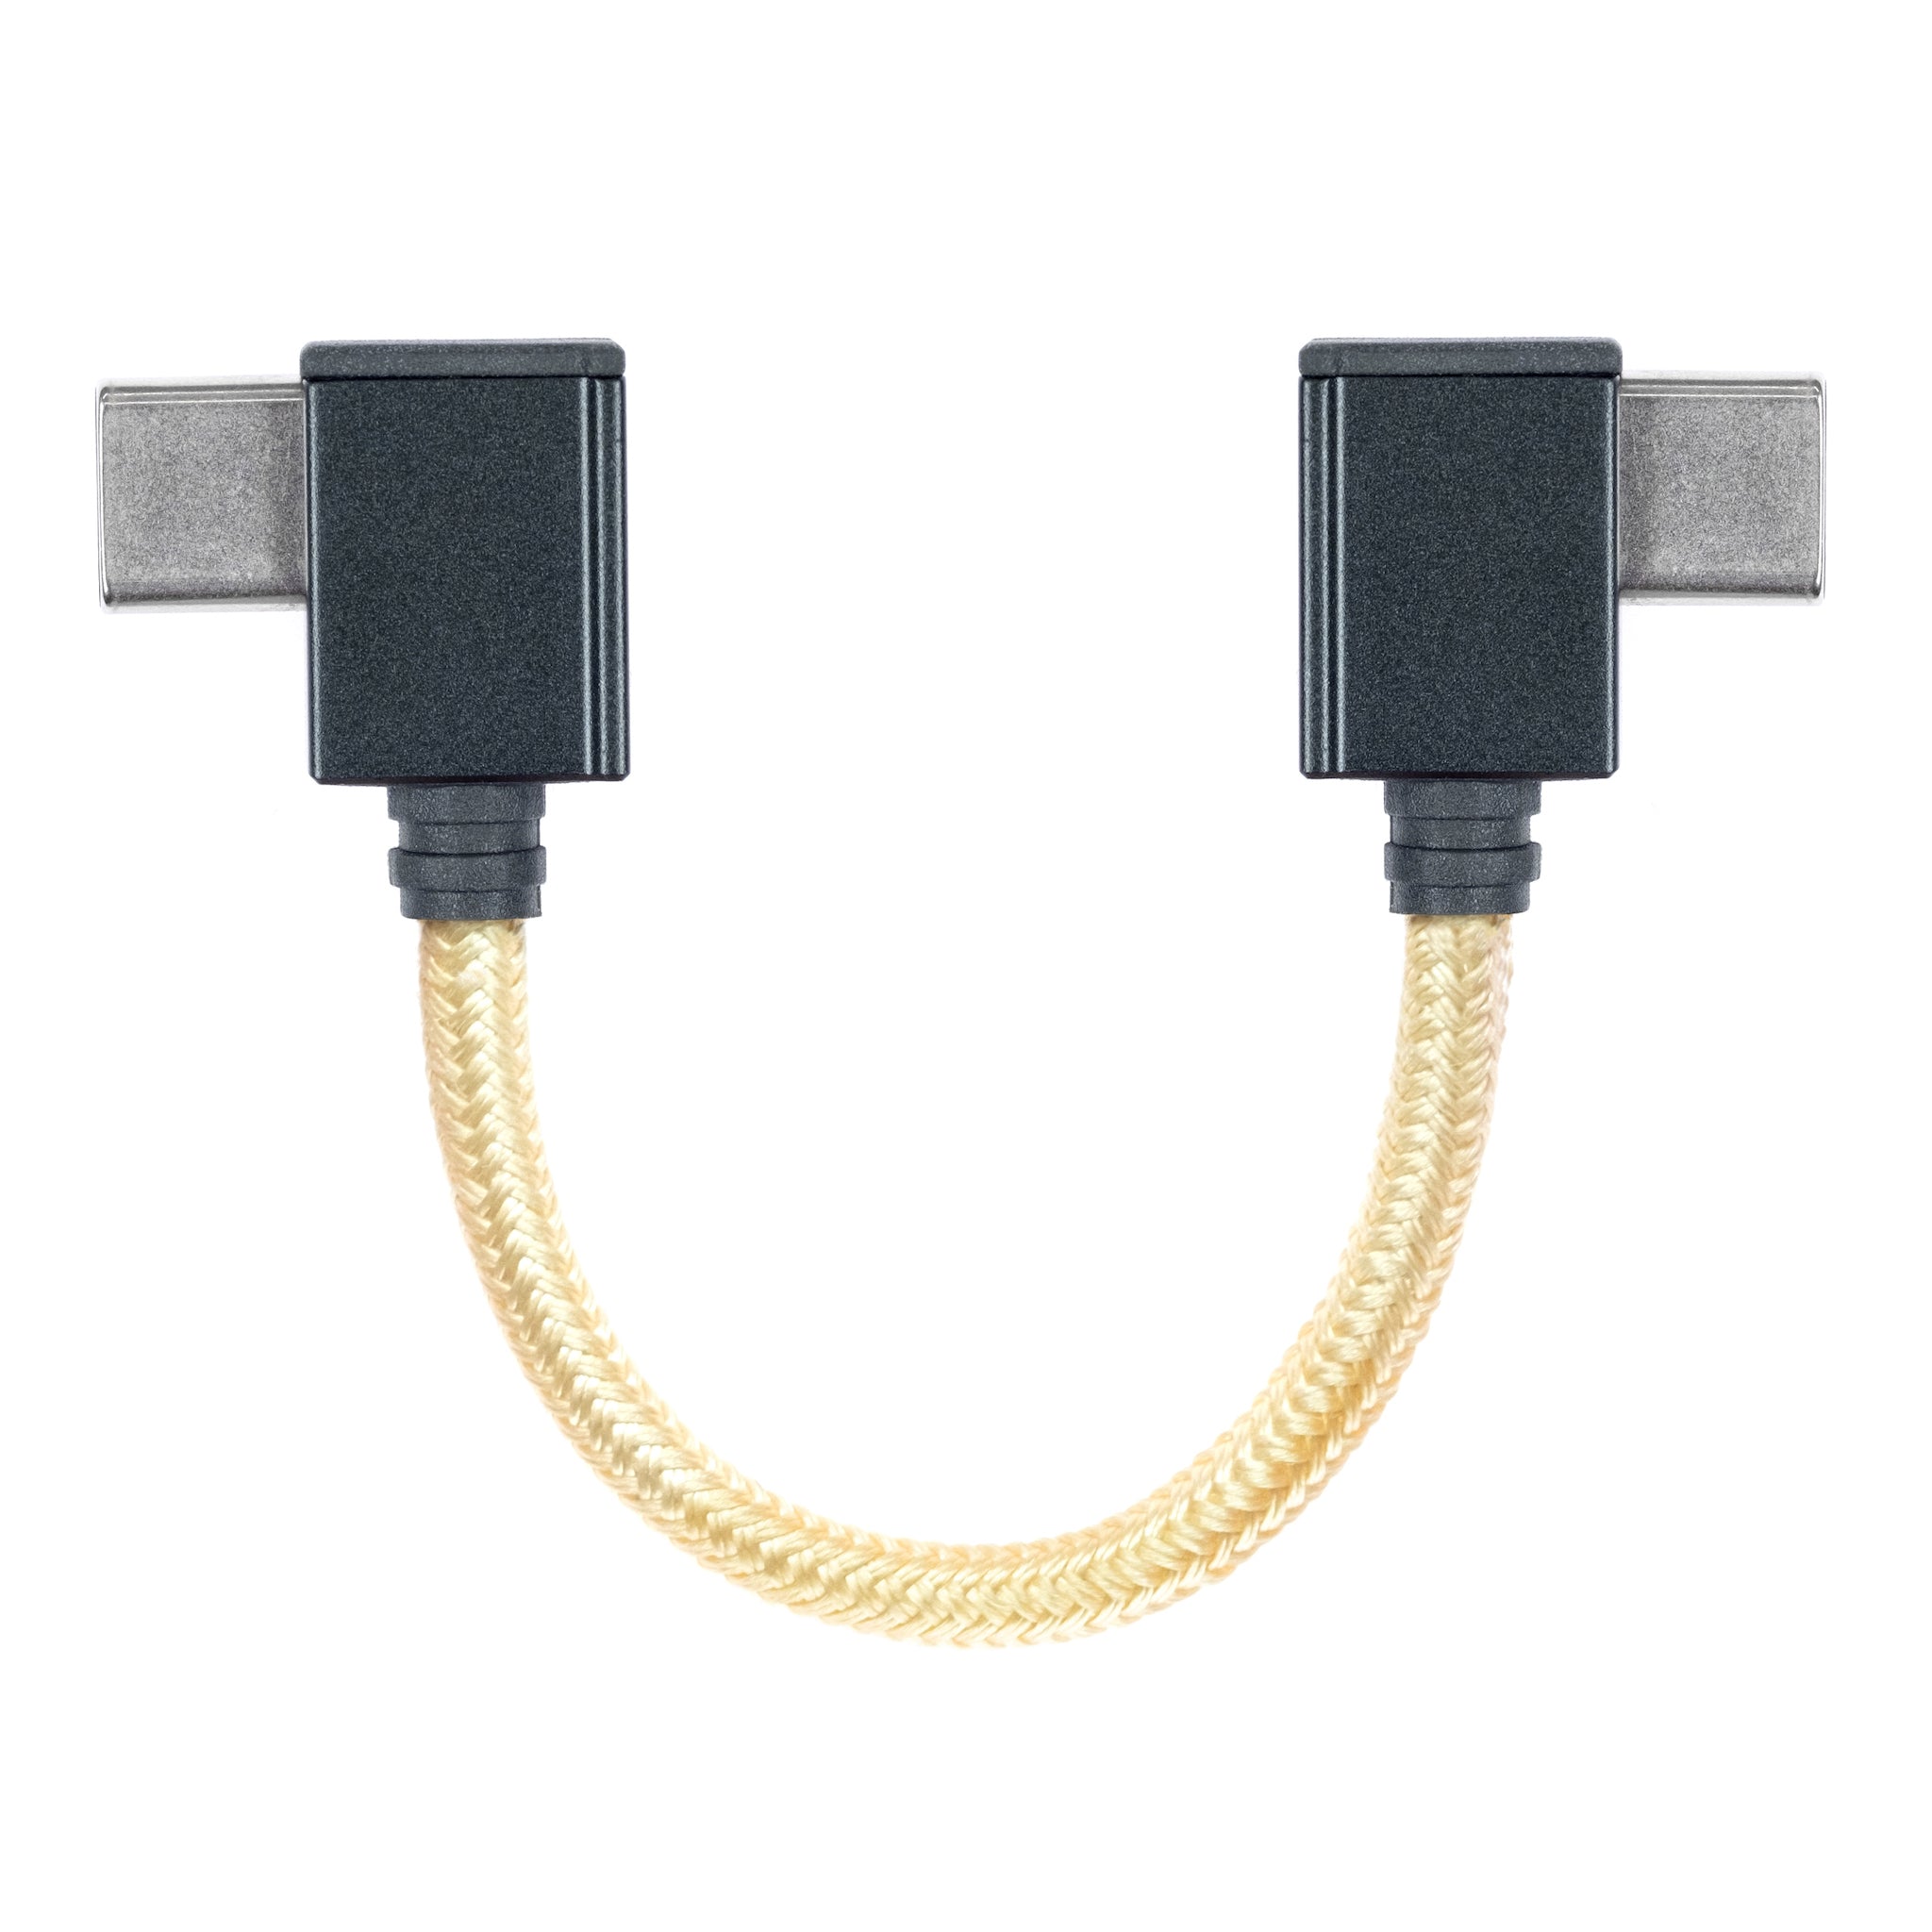 USB 2.0 OTG Cable with 2-in-1 Connector - Combo A Male + Micro-B Male to  Micro-B Male, 7-in.